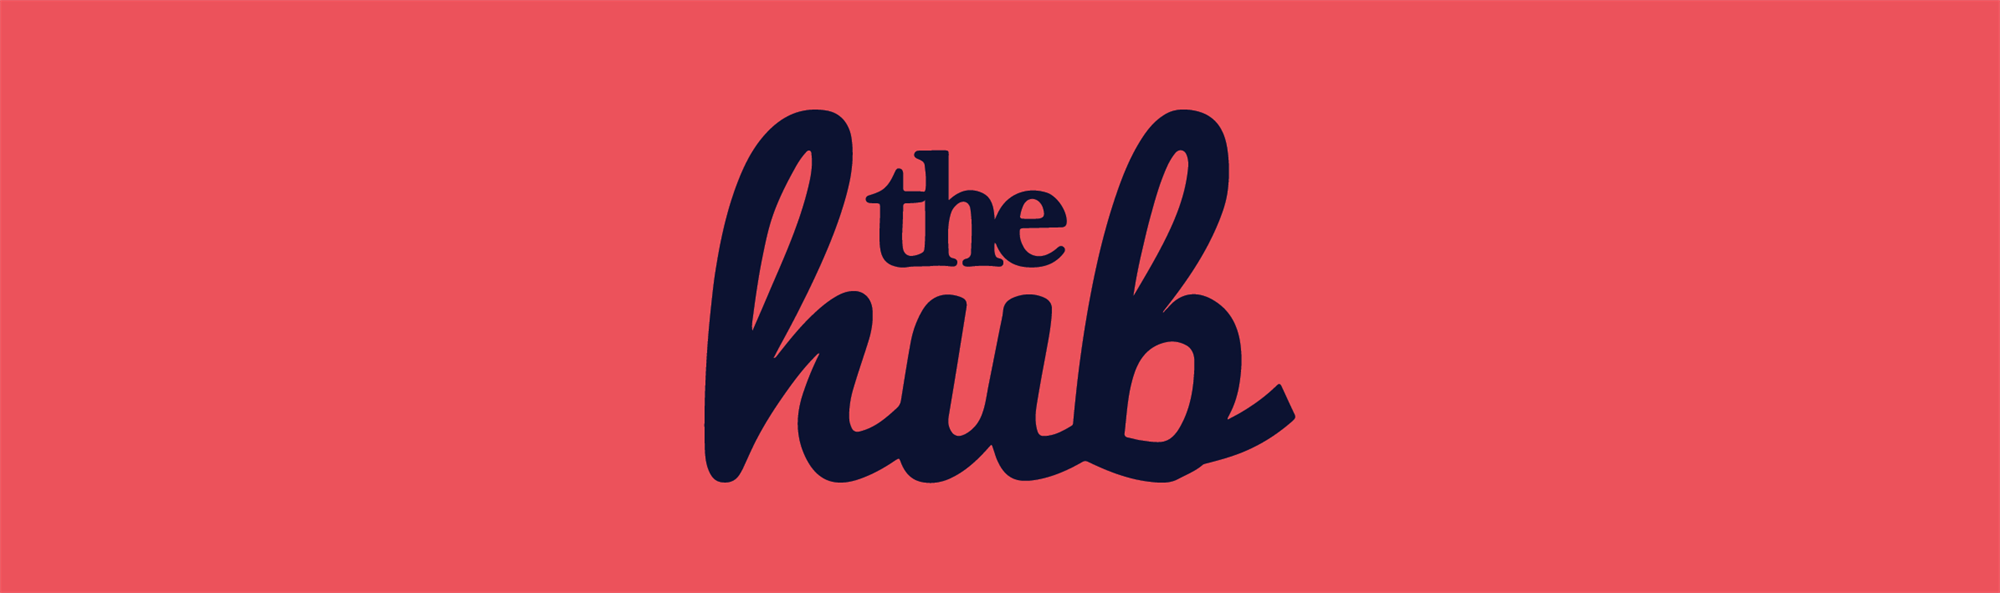 The Hub is our venue on the Bognor Regis Campus situated just along from our Bognor offices.